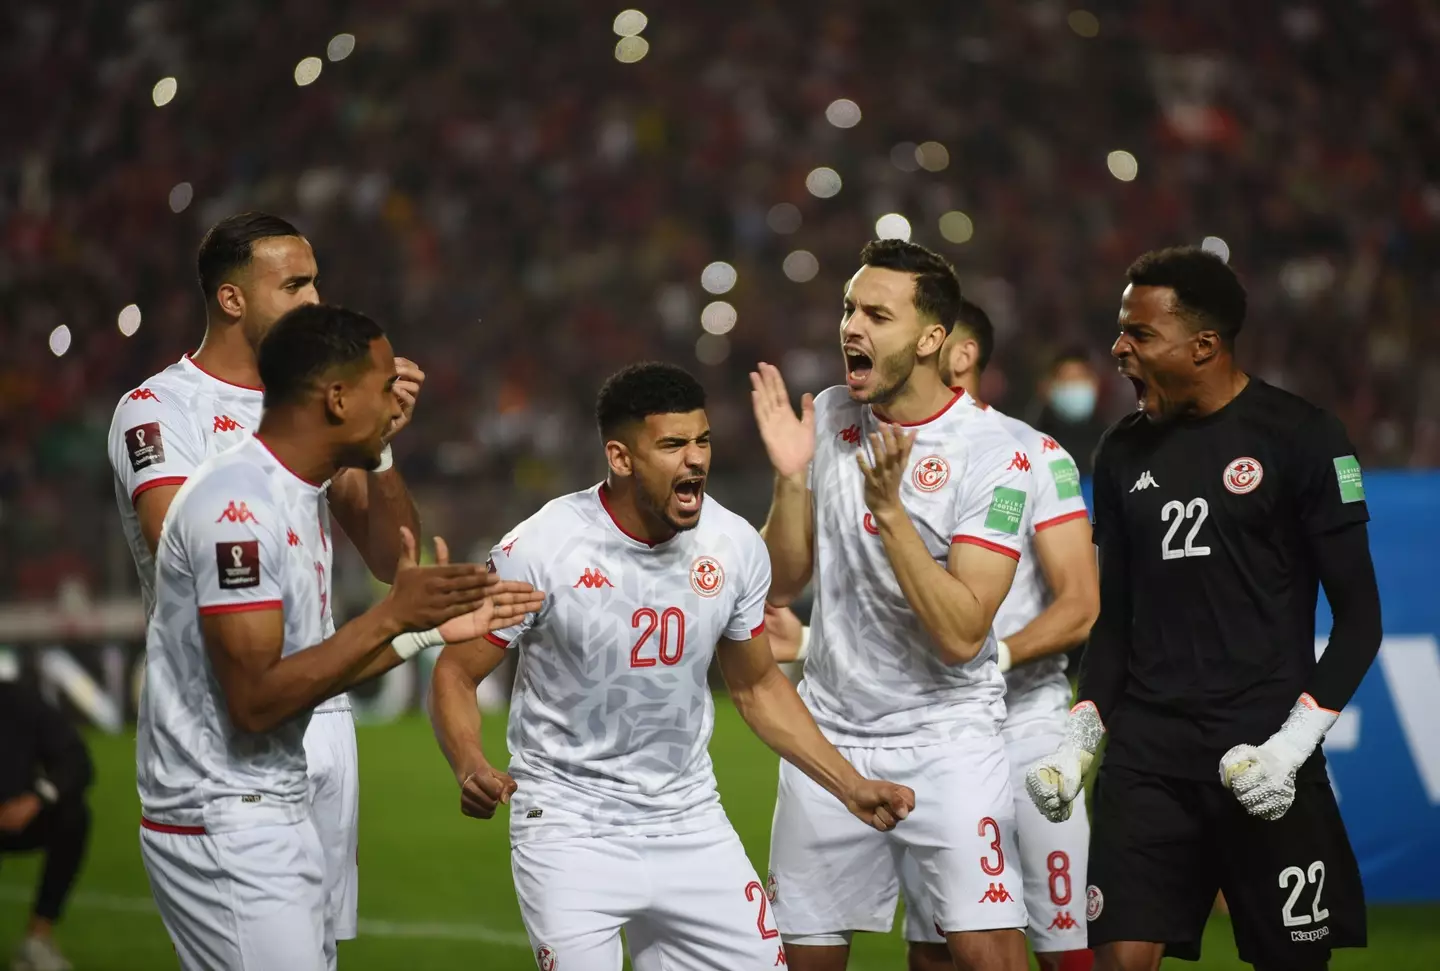 Tunisia have been drawn alongside France, Australia and Denmark in Group D (Image: Alamy)